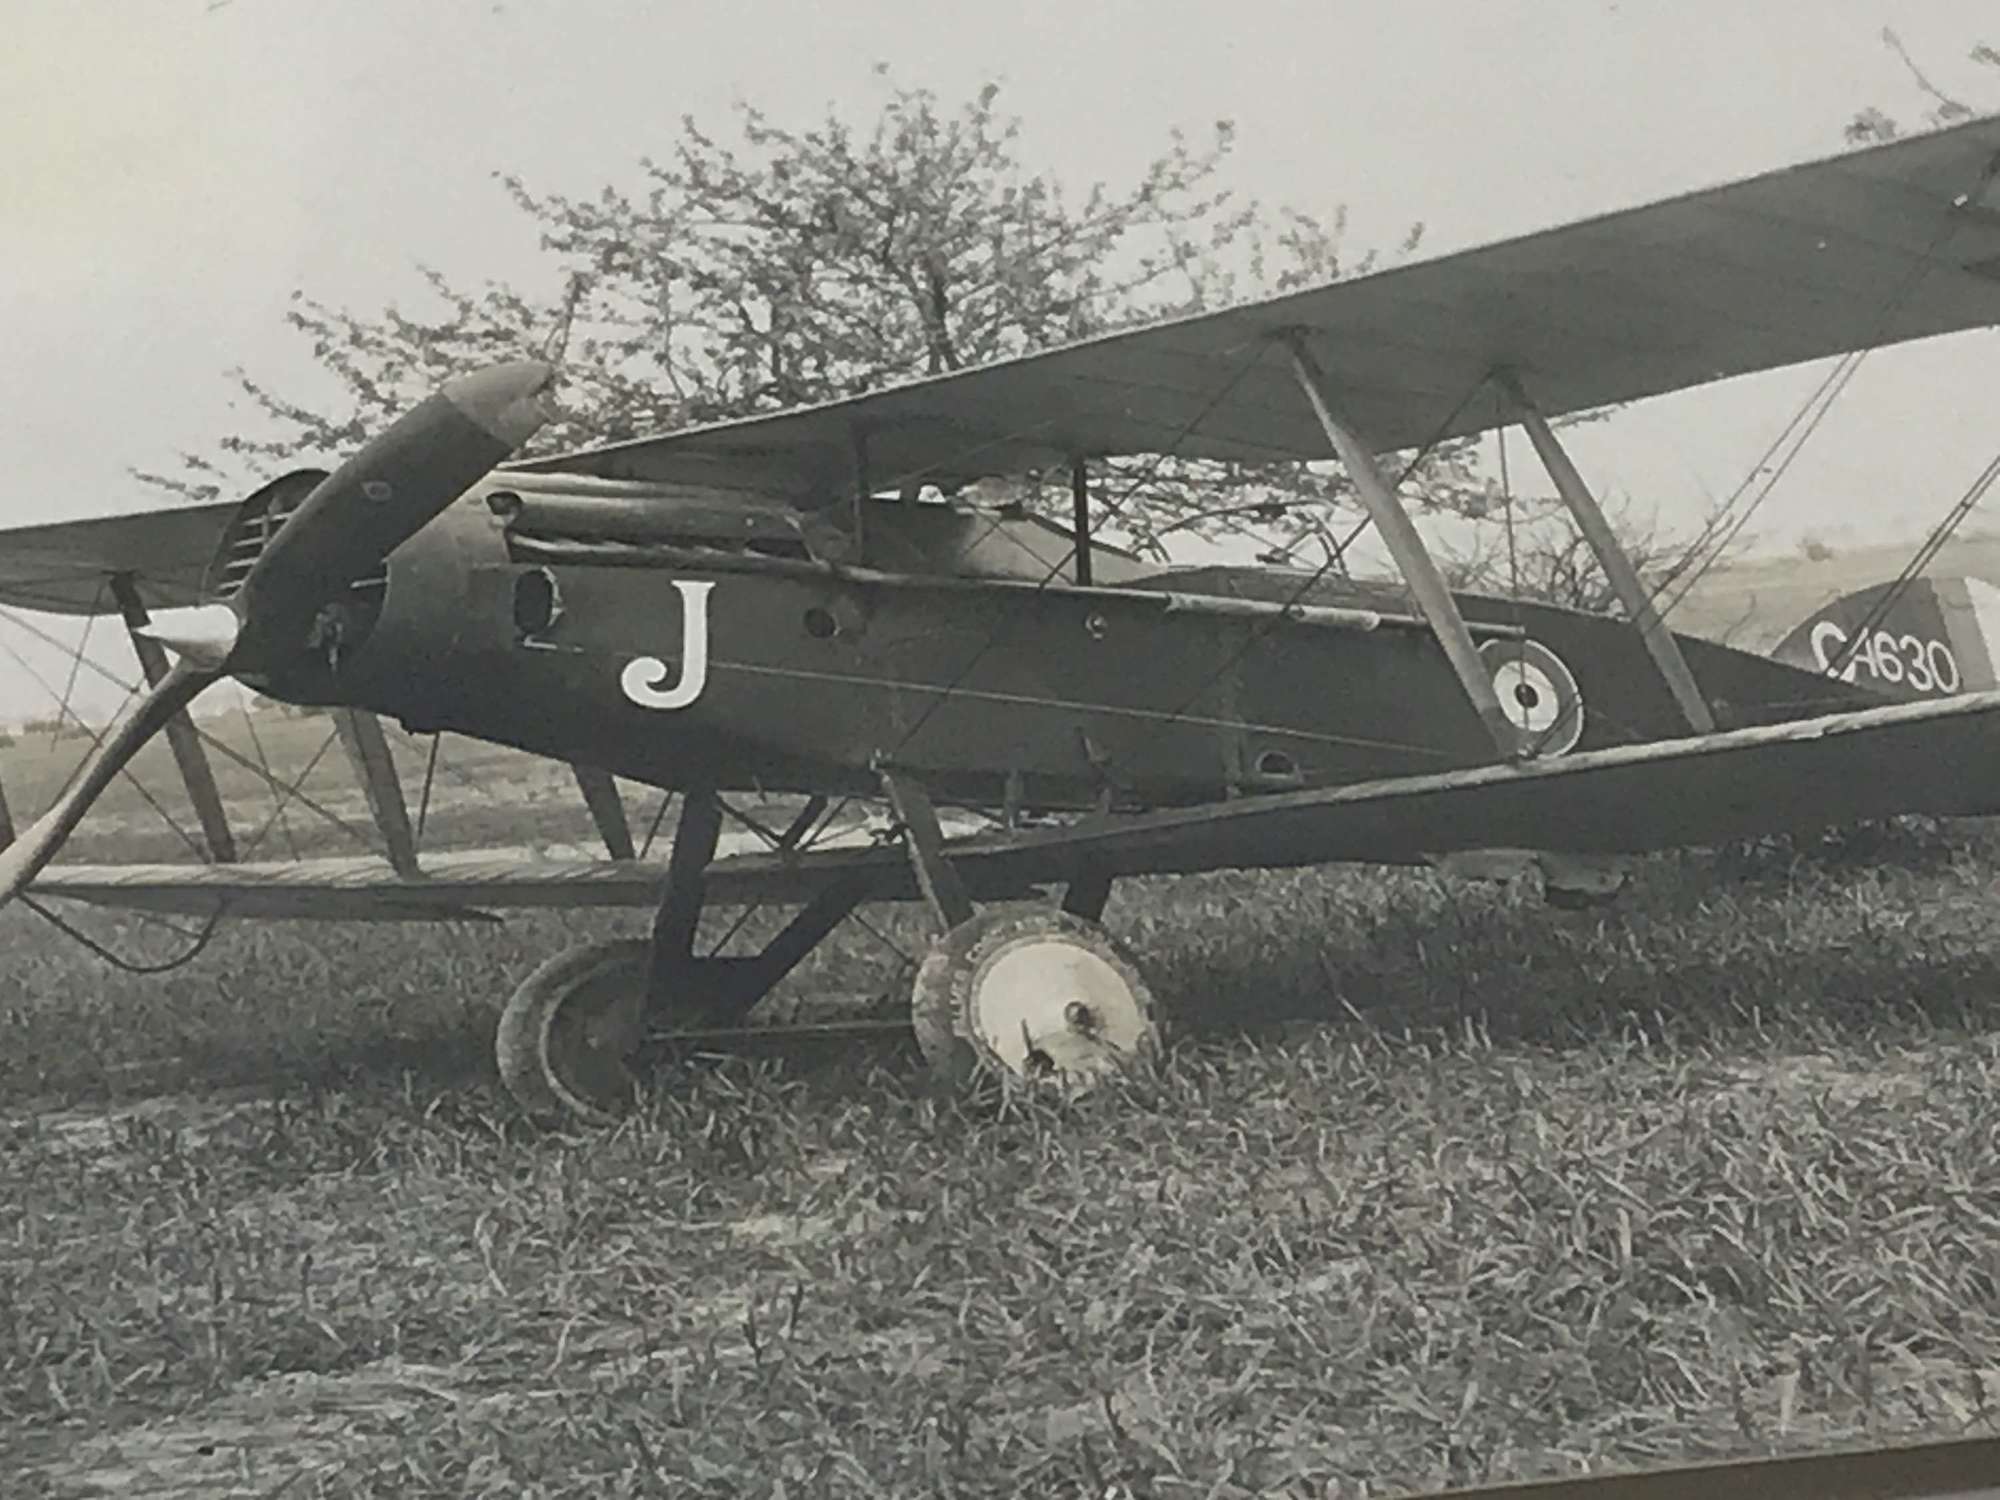 Photograph of a Bristol fighter C 4630